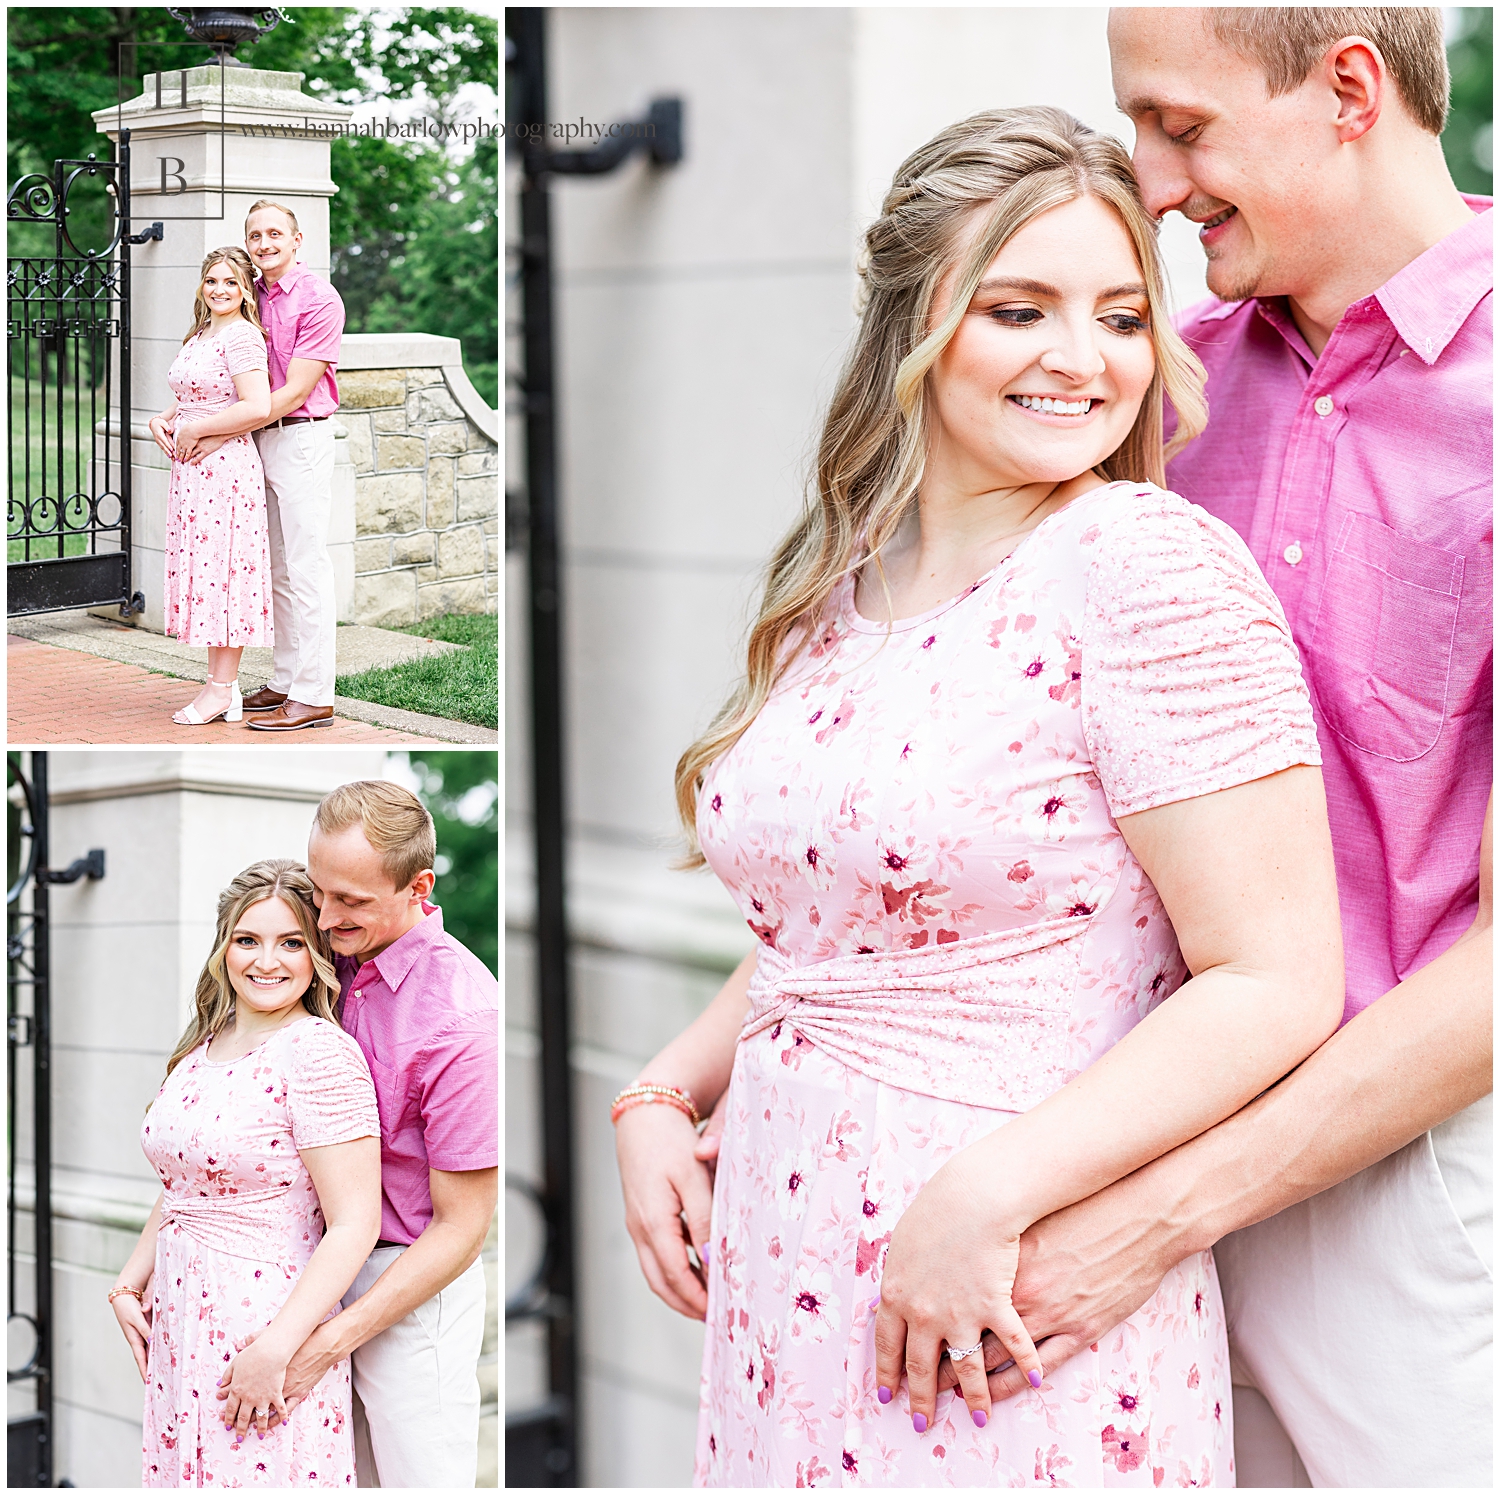 Man in pink shirt hugs fiancé from behind and holds her close for engagement photos.